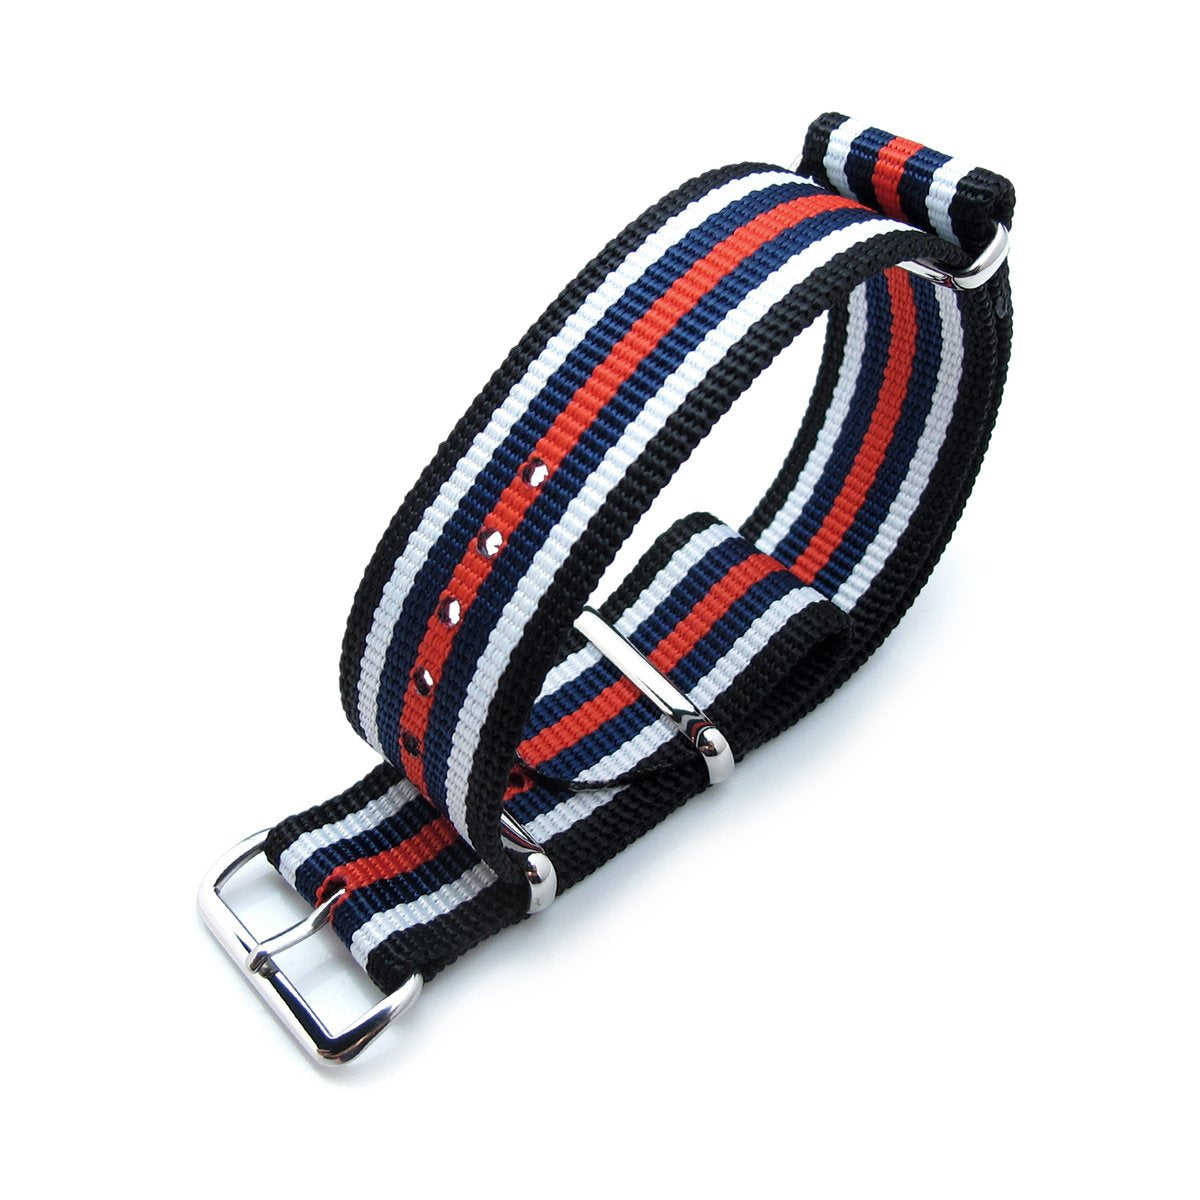 MiLTAT 21mm or 22mm G10 NATO Bullet Tail Watch Strap Ballistic Nylon Polished Black White Blue & Red Stripes Strapcode Watch Bands